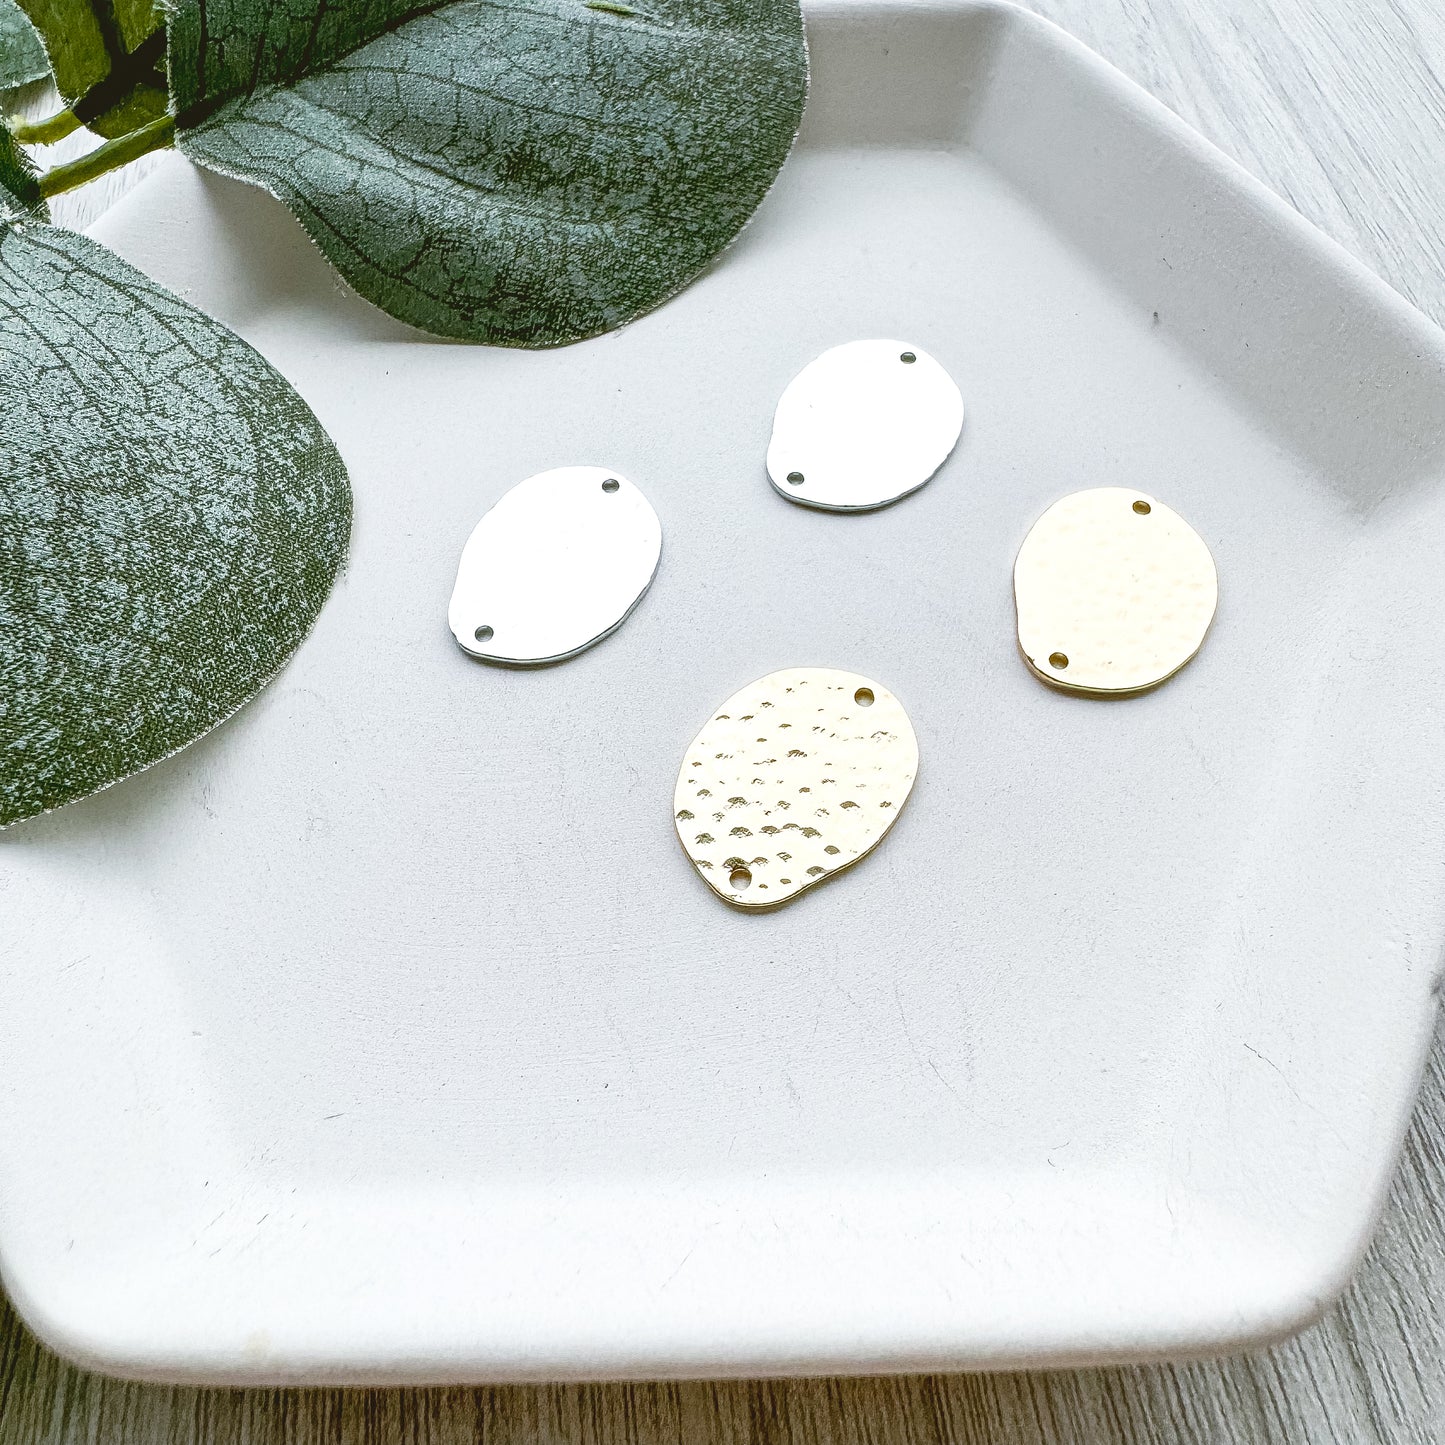 Organic Oval Hammered Connector - 10 PIECES - March Launch